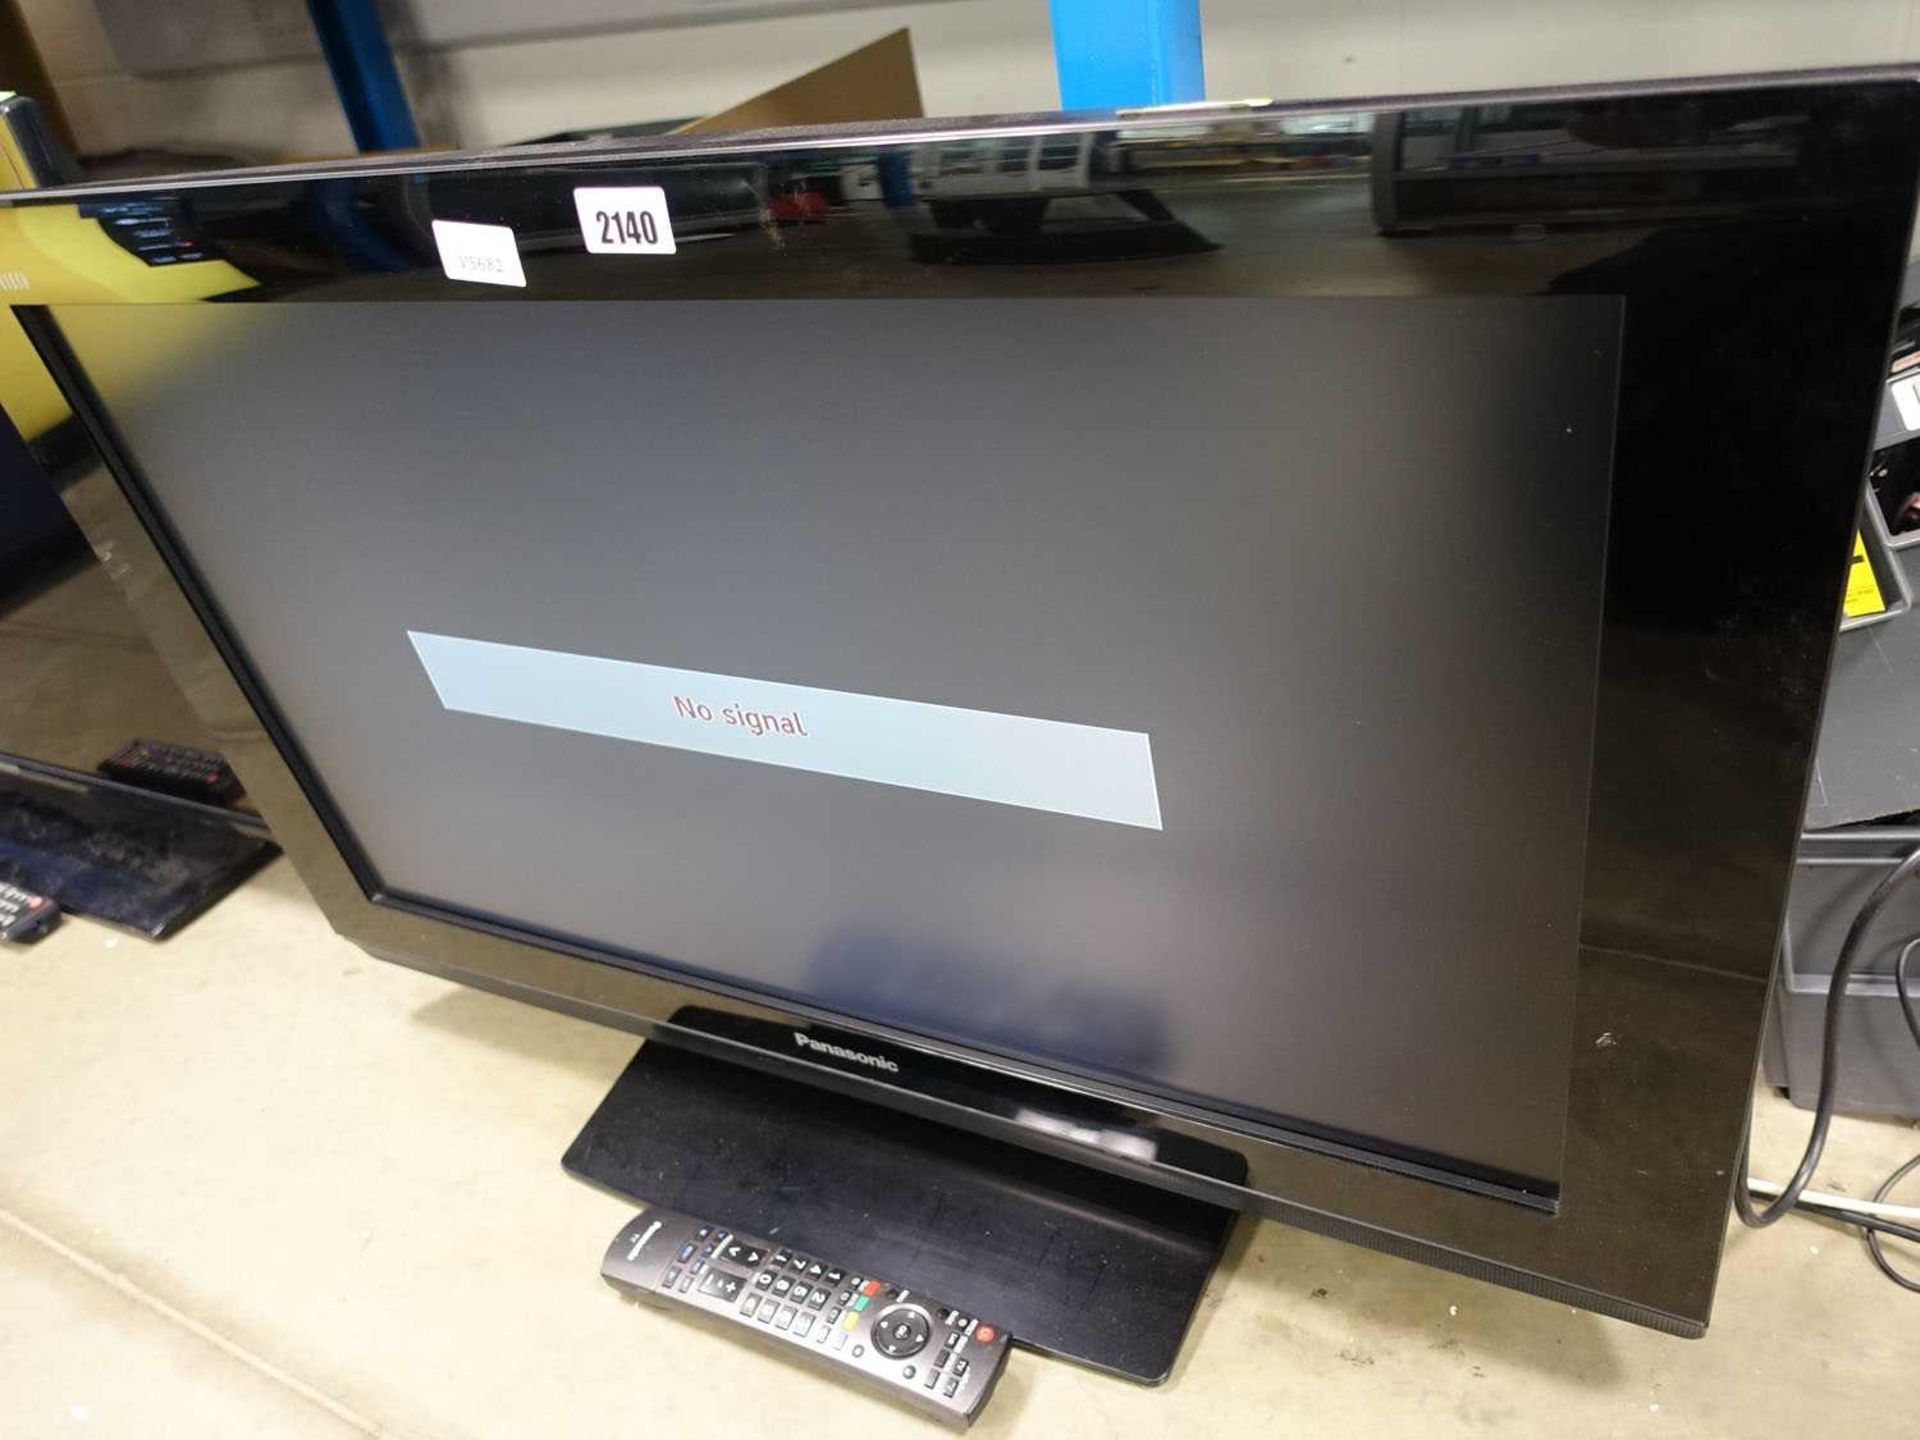 Panasonic 32" LCD tv with remote control